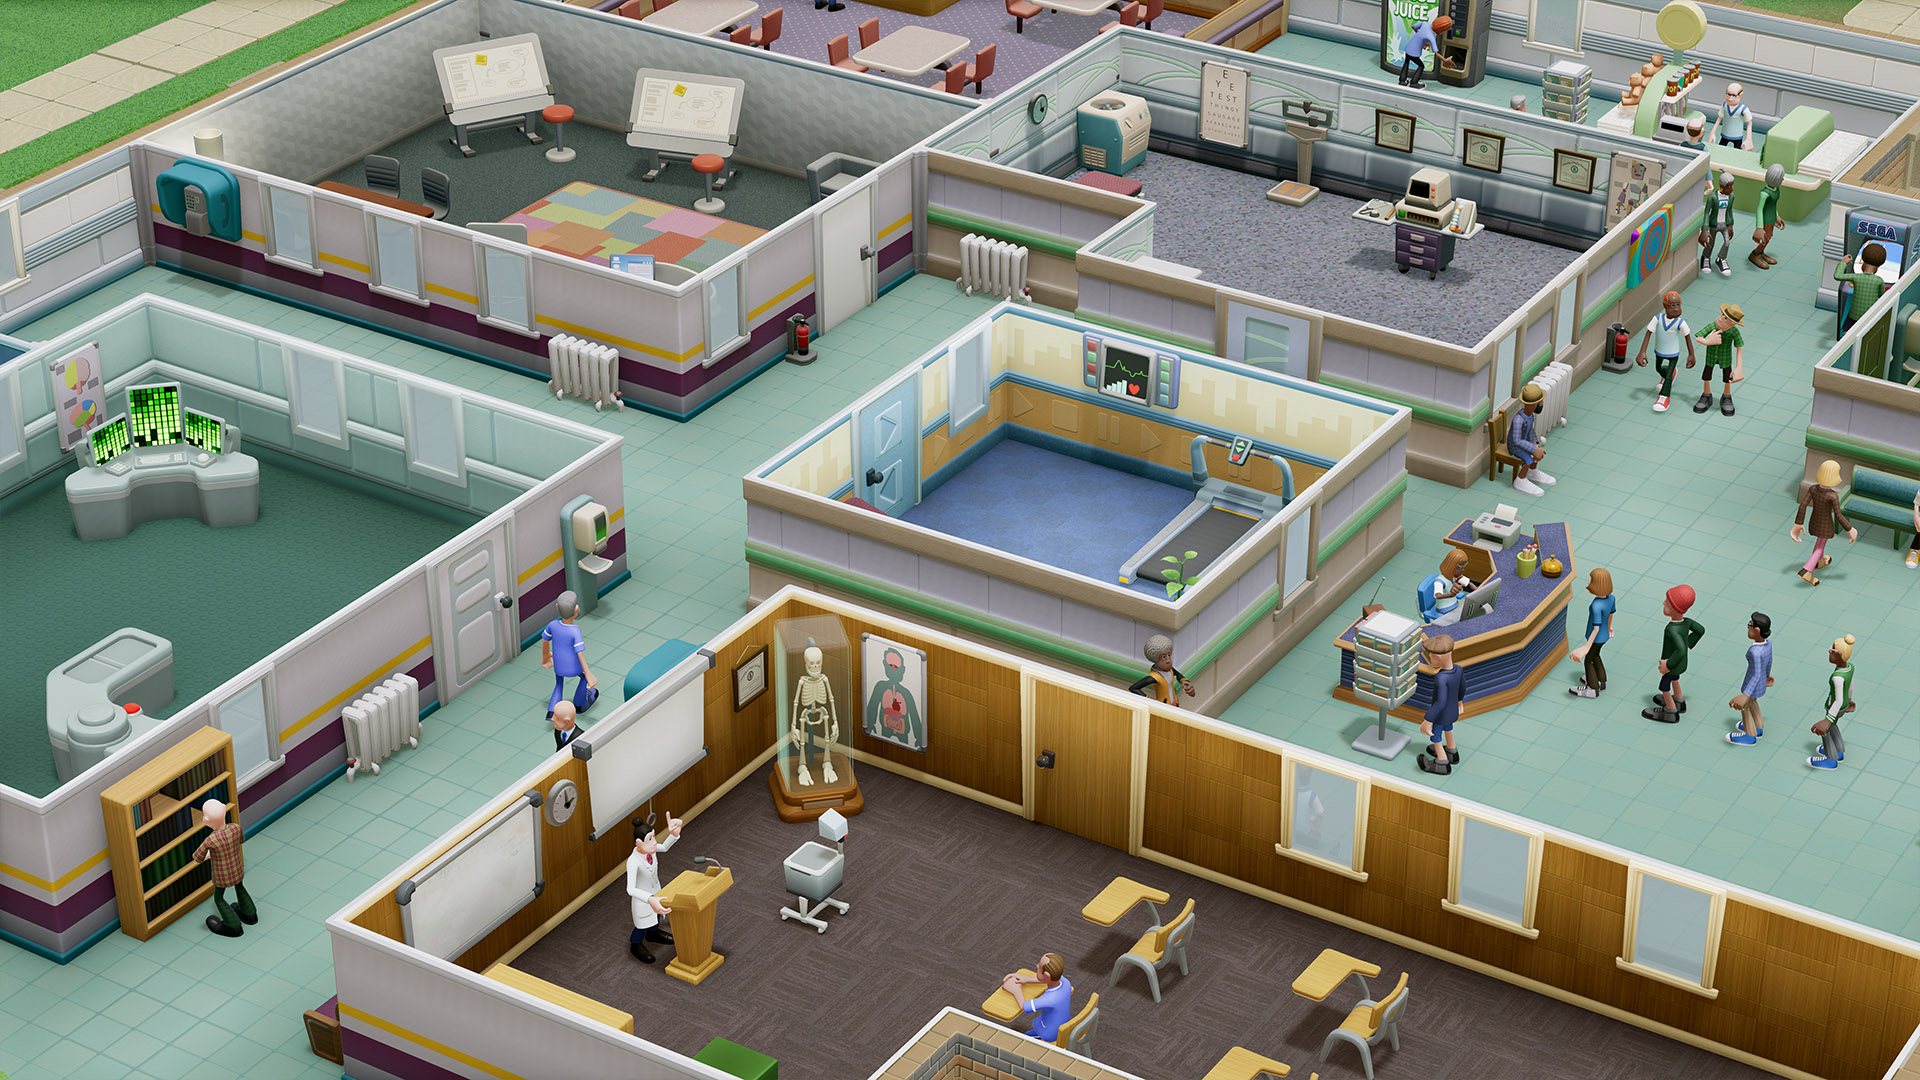 Two Point Hospital: Healthy Collection Vol. 1 Bundle RoW Steam CD Key